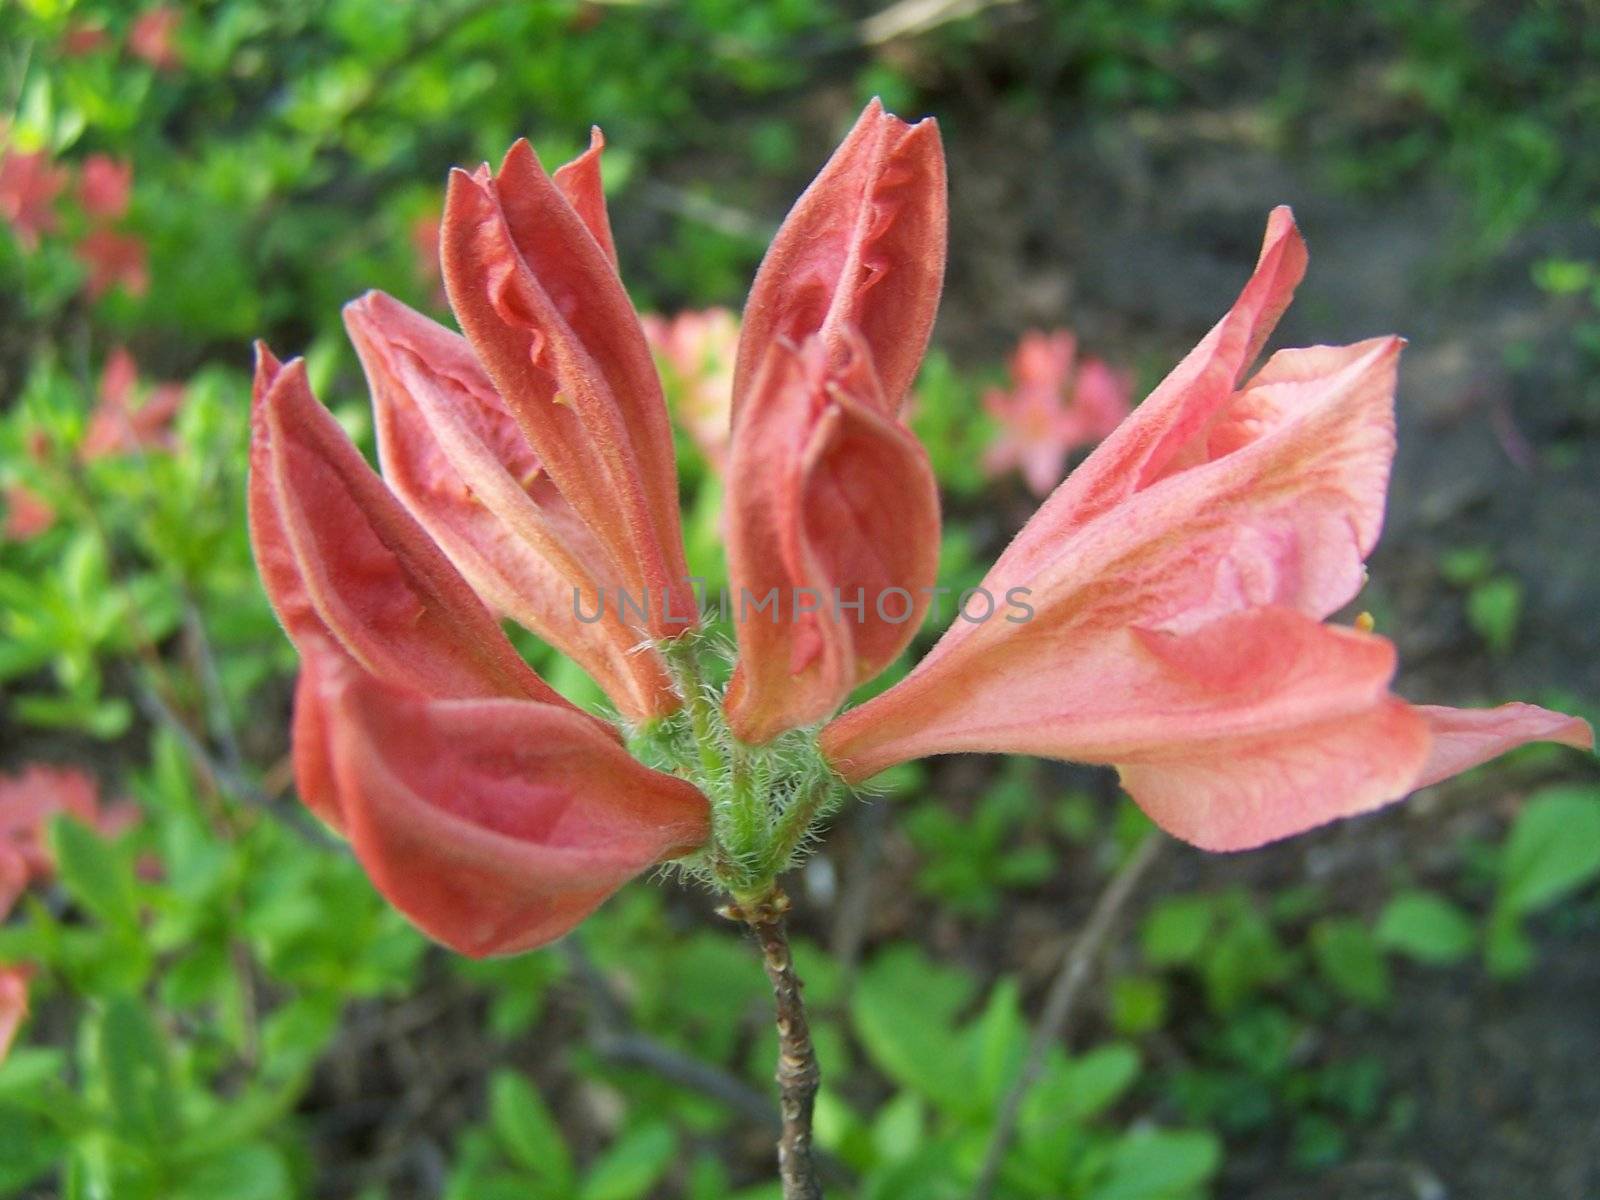 Close up of a branch with several azalea flowers.